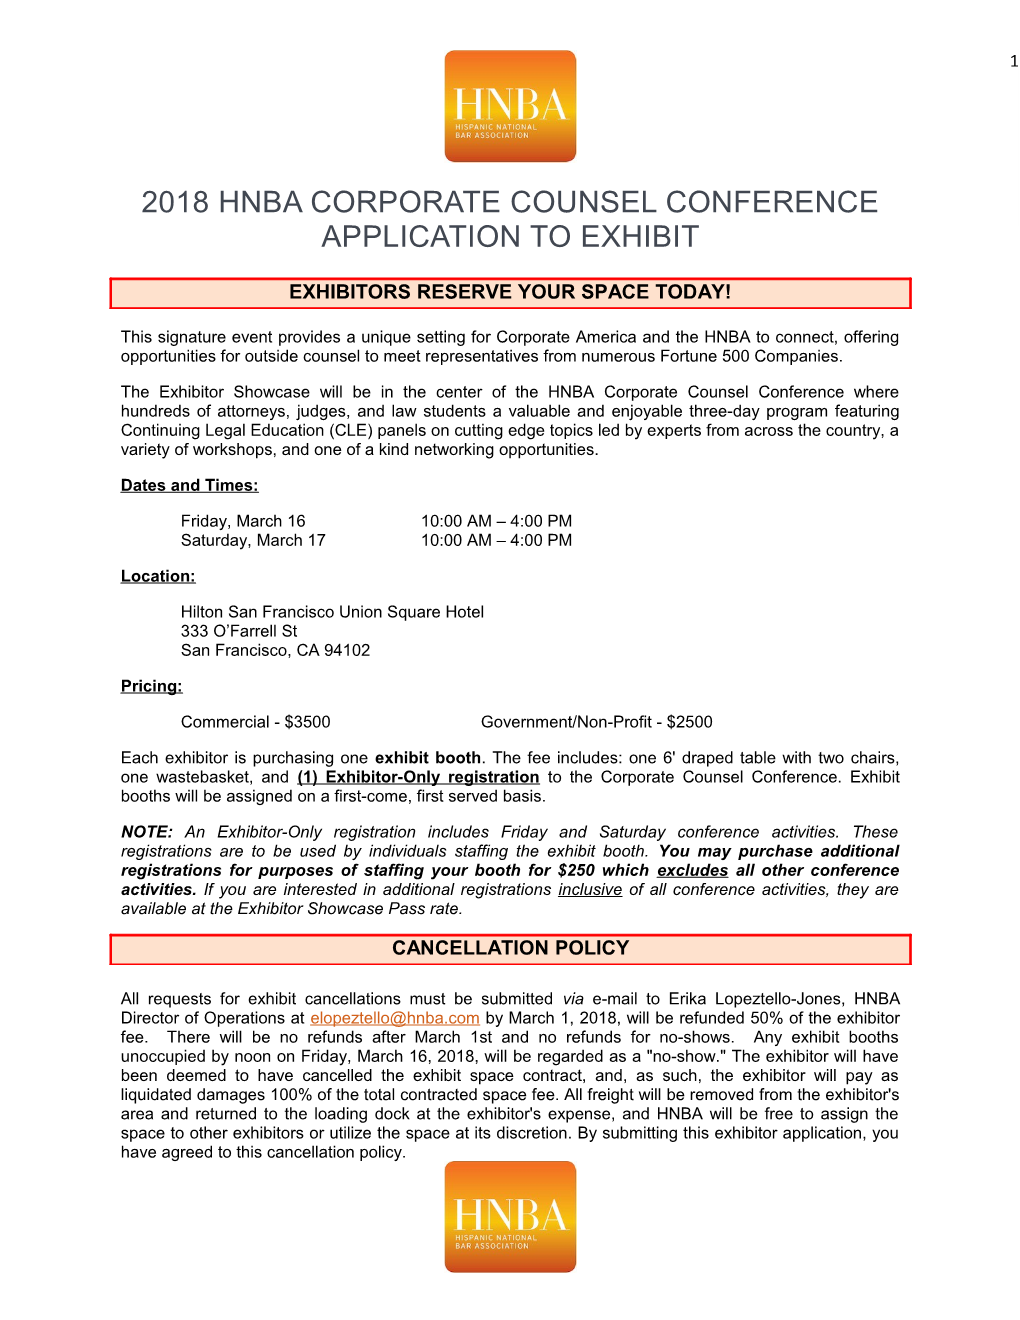 2018 Hnba Corporate Counsel Conference Application to Exhibit